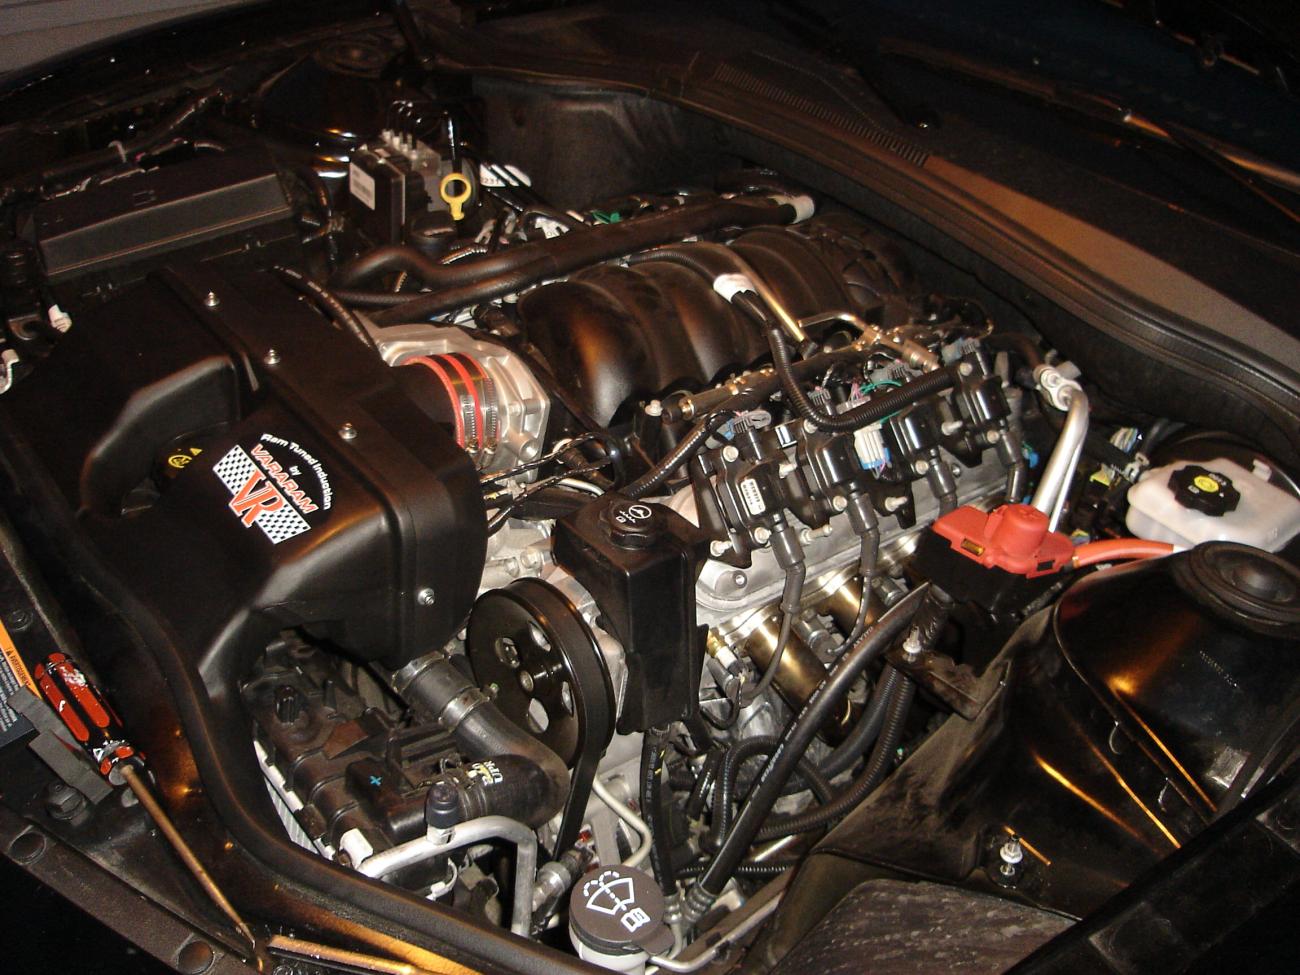 Engine Bay with old VR